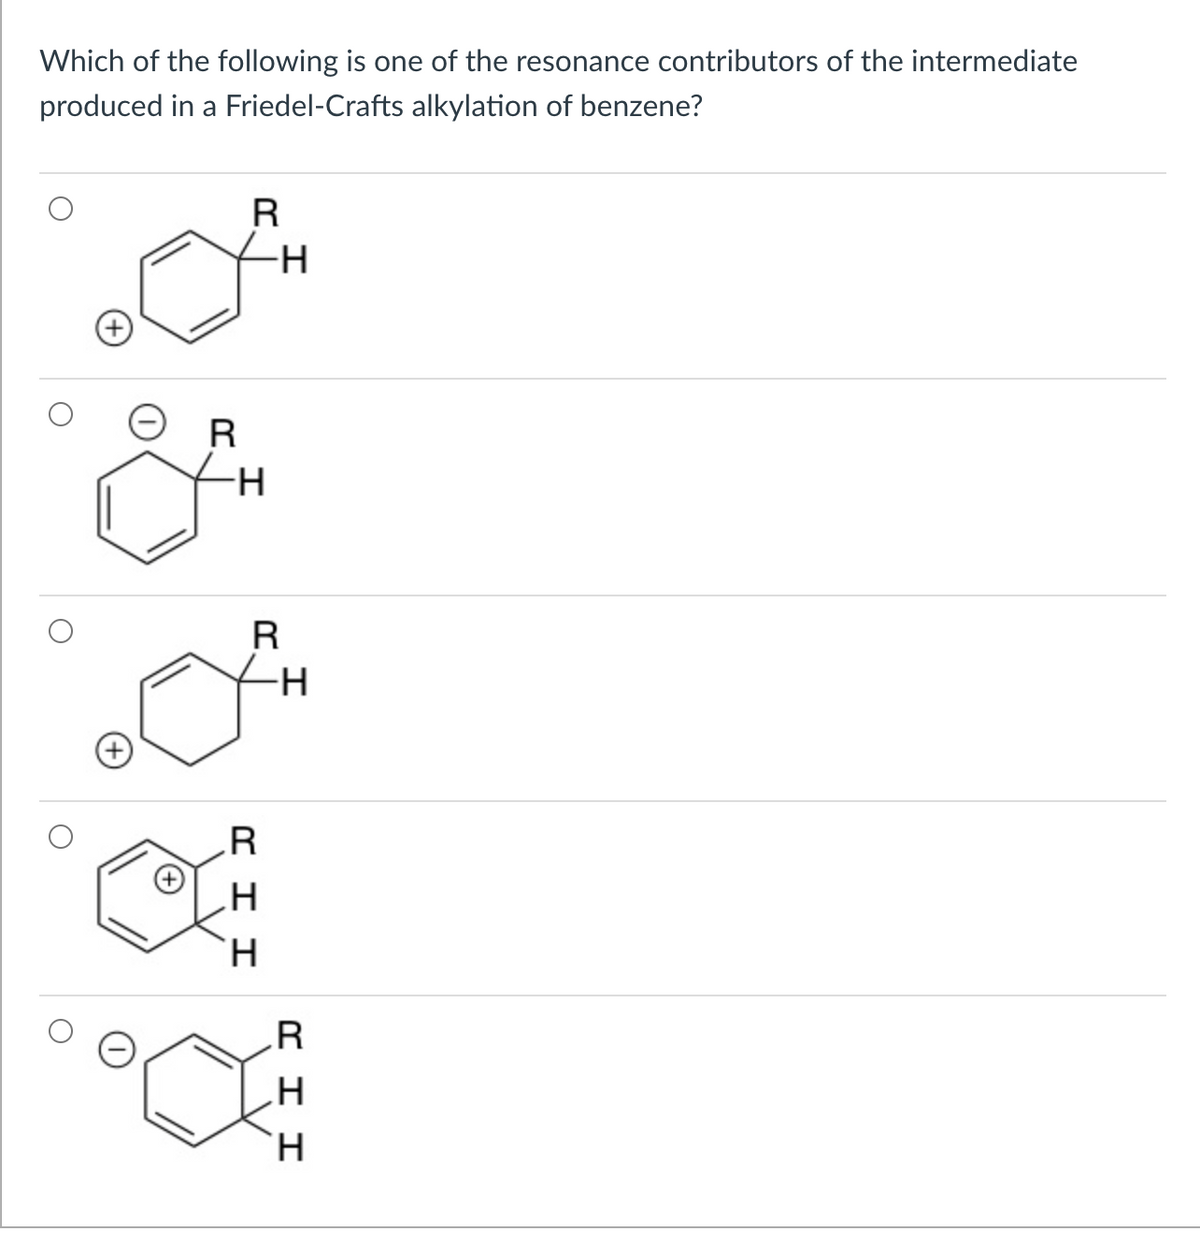 Which of the following is one of the resonance contributors of the intermediate
produced in a Friedel-Crafts alkylation of benzene?
R
-H
R
R
-H-
.R
H.
`H.
エエロ
エエロ
エ
